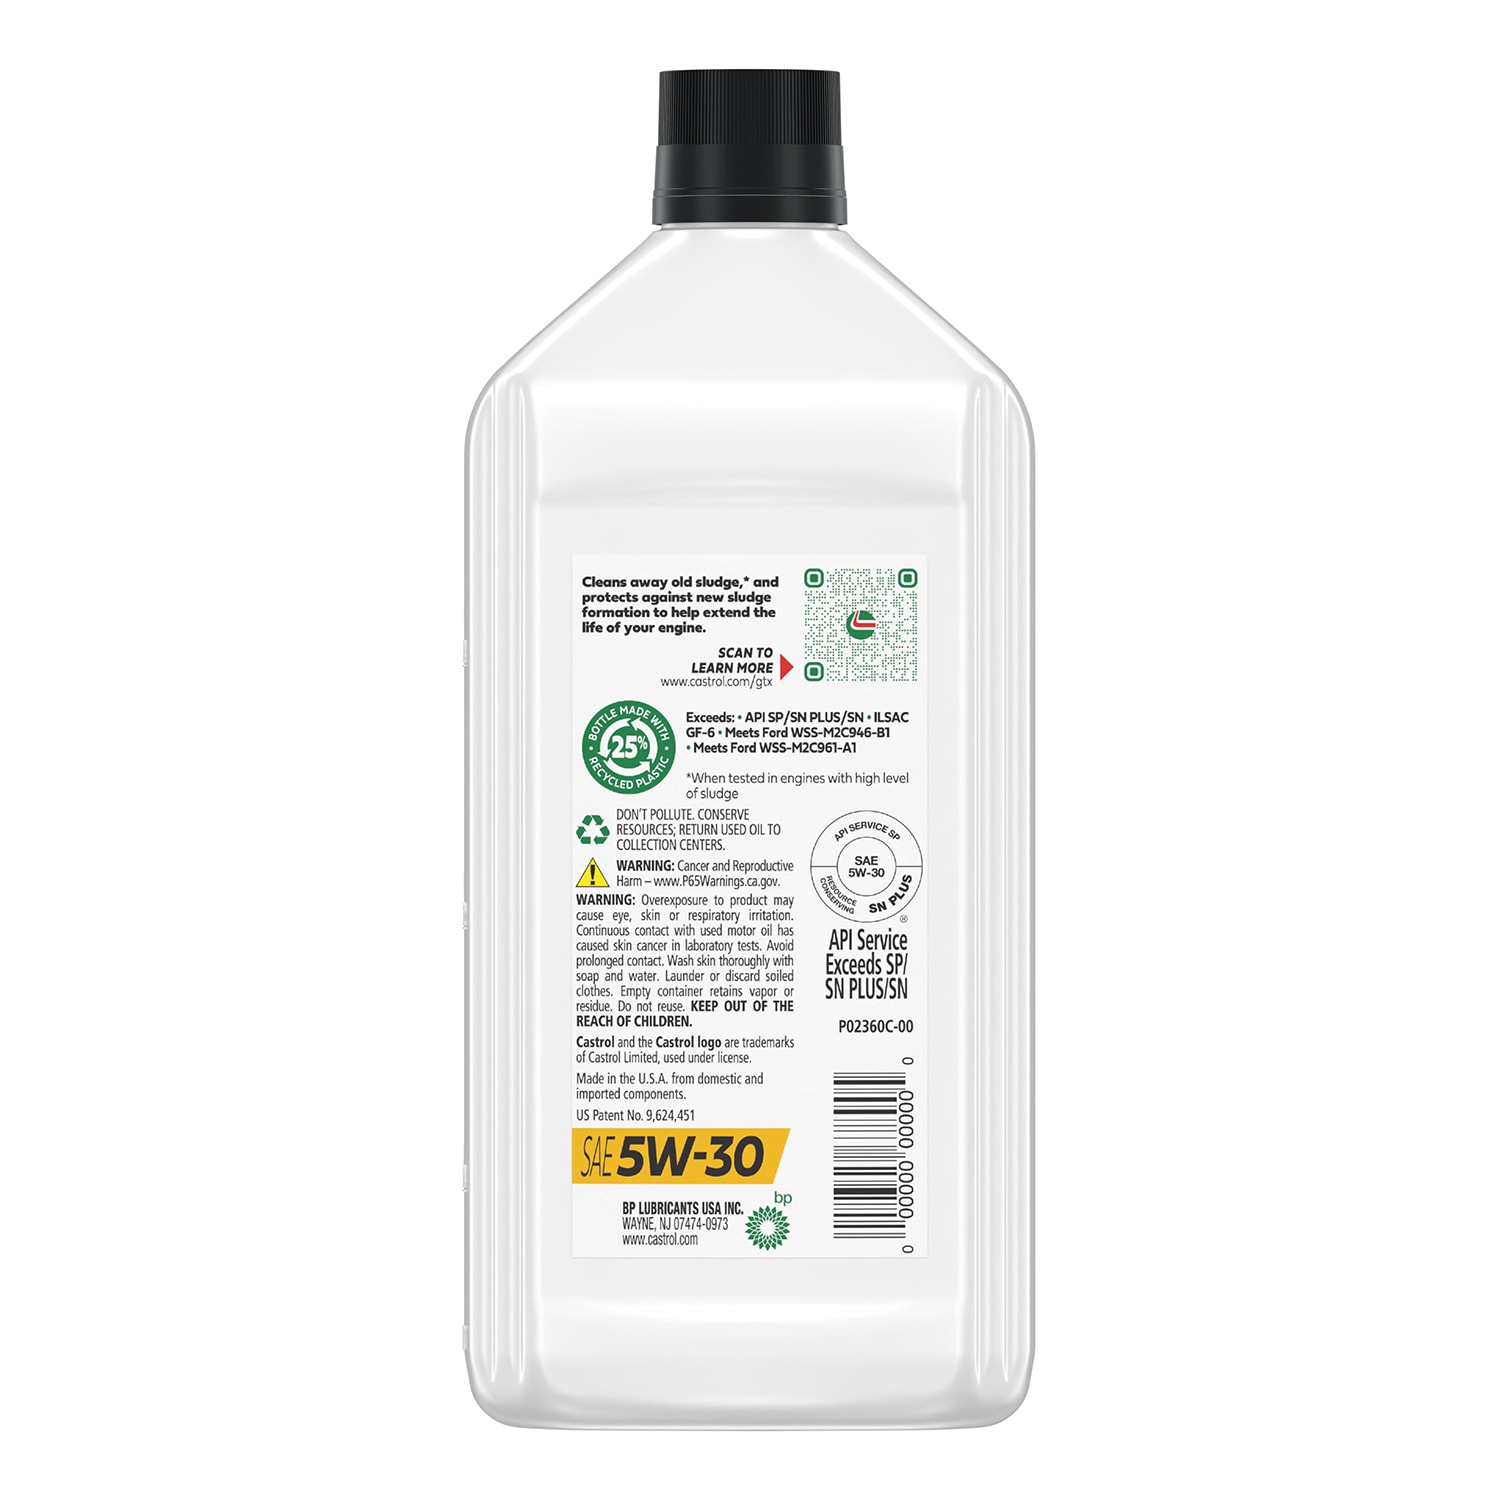 CASTROL 1-Quart 5W-30 Advanced Full Synthetic Motor Oil in the Motor Oil u0026  Additives department at Lowes.com